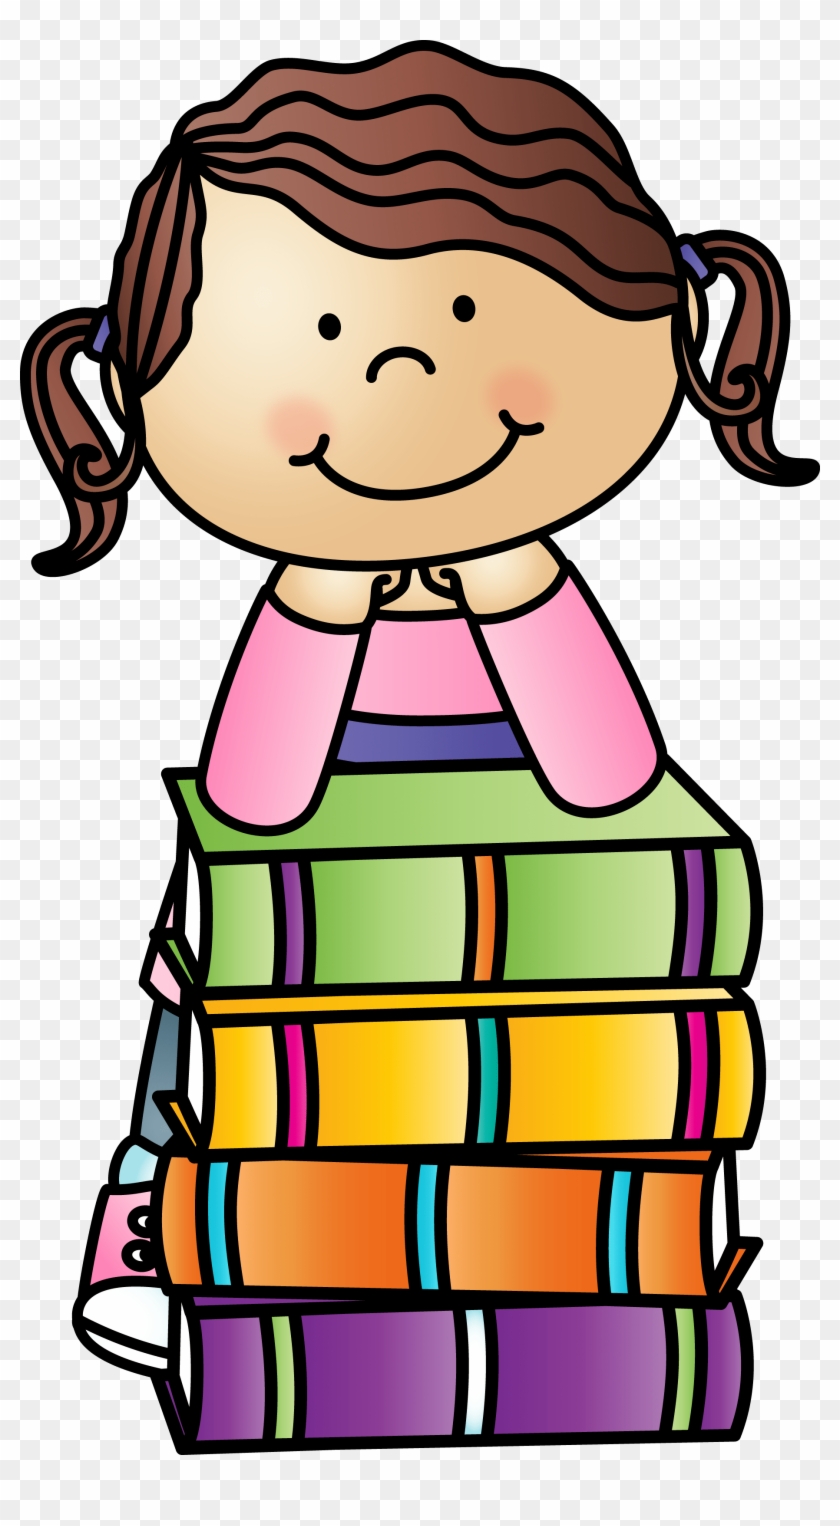 4 Must Have Books For Back To School - 4 Must Have Books For Back To School #1614008